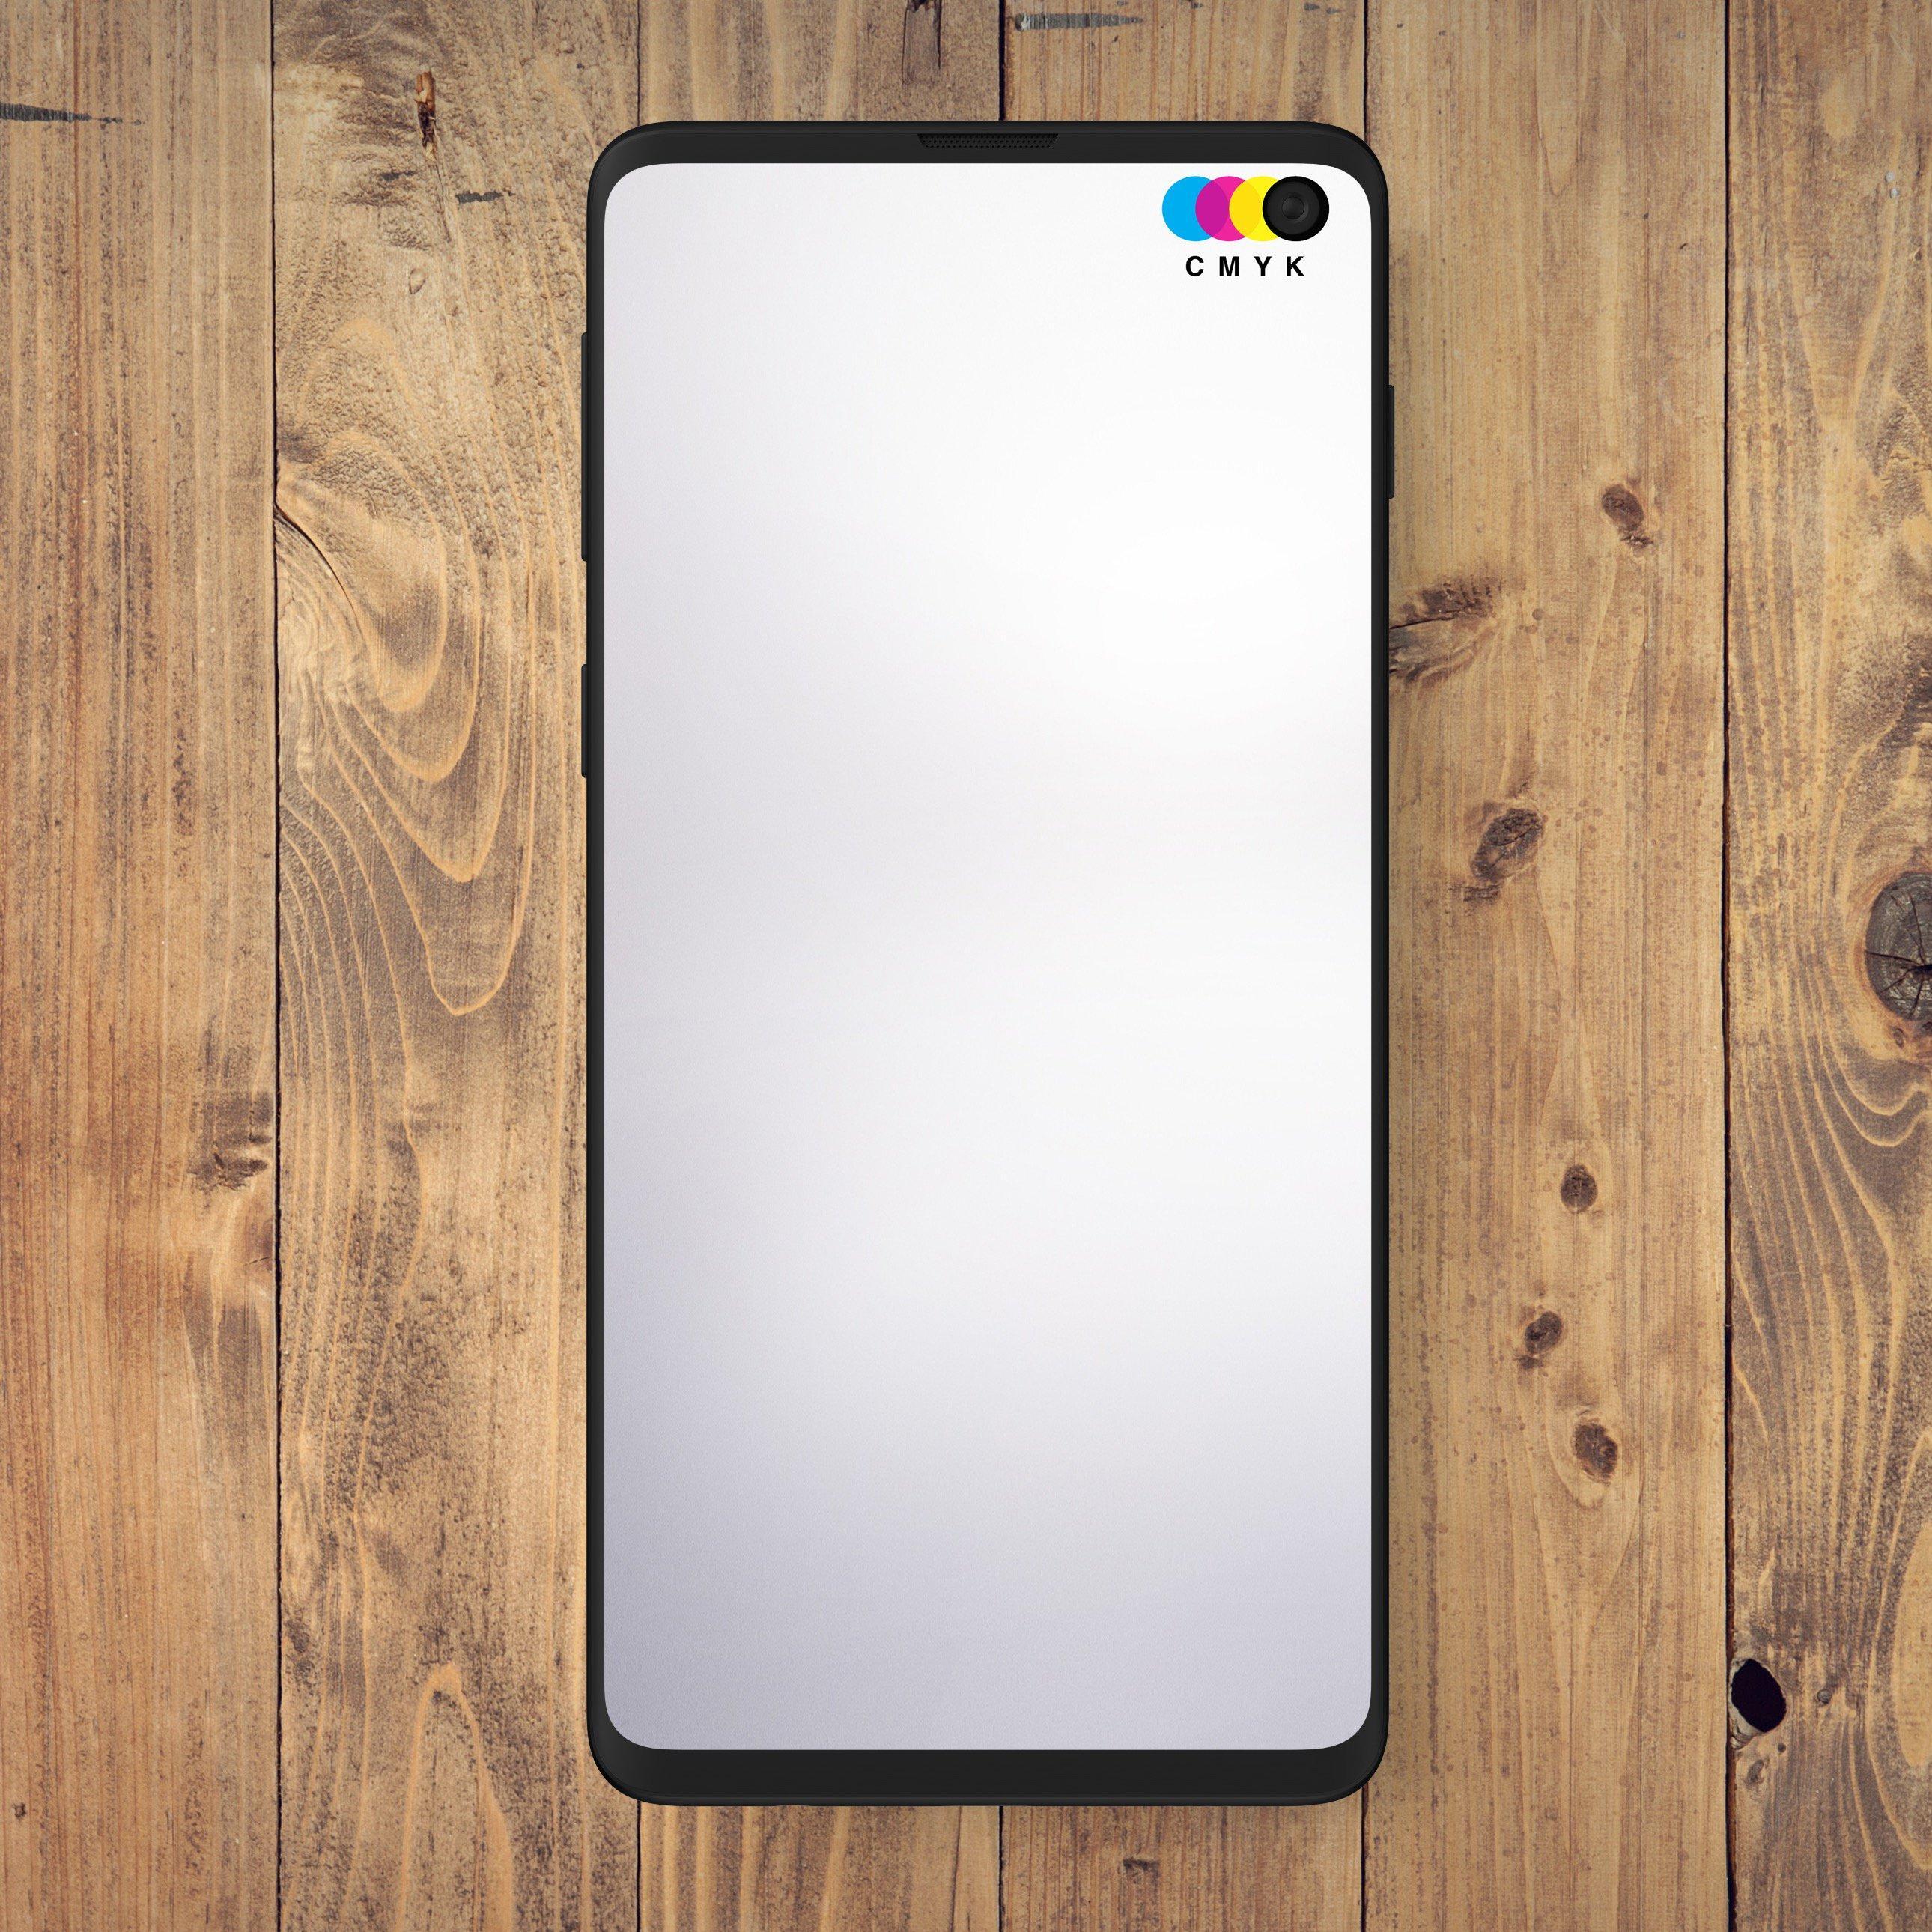 Galaxy S10 Hole punch Wallpapers for Android - APK Download